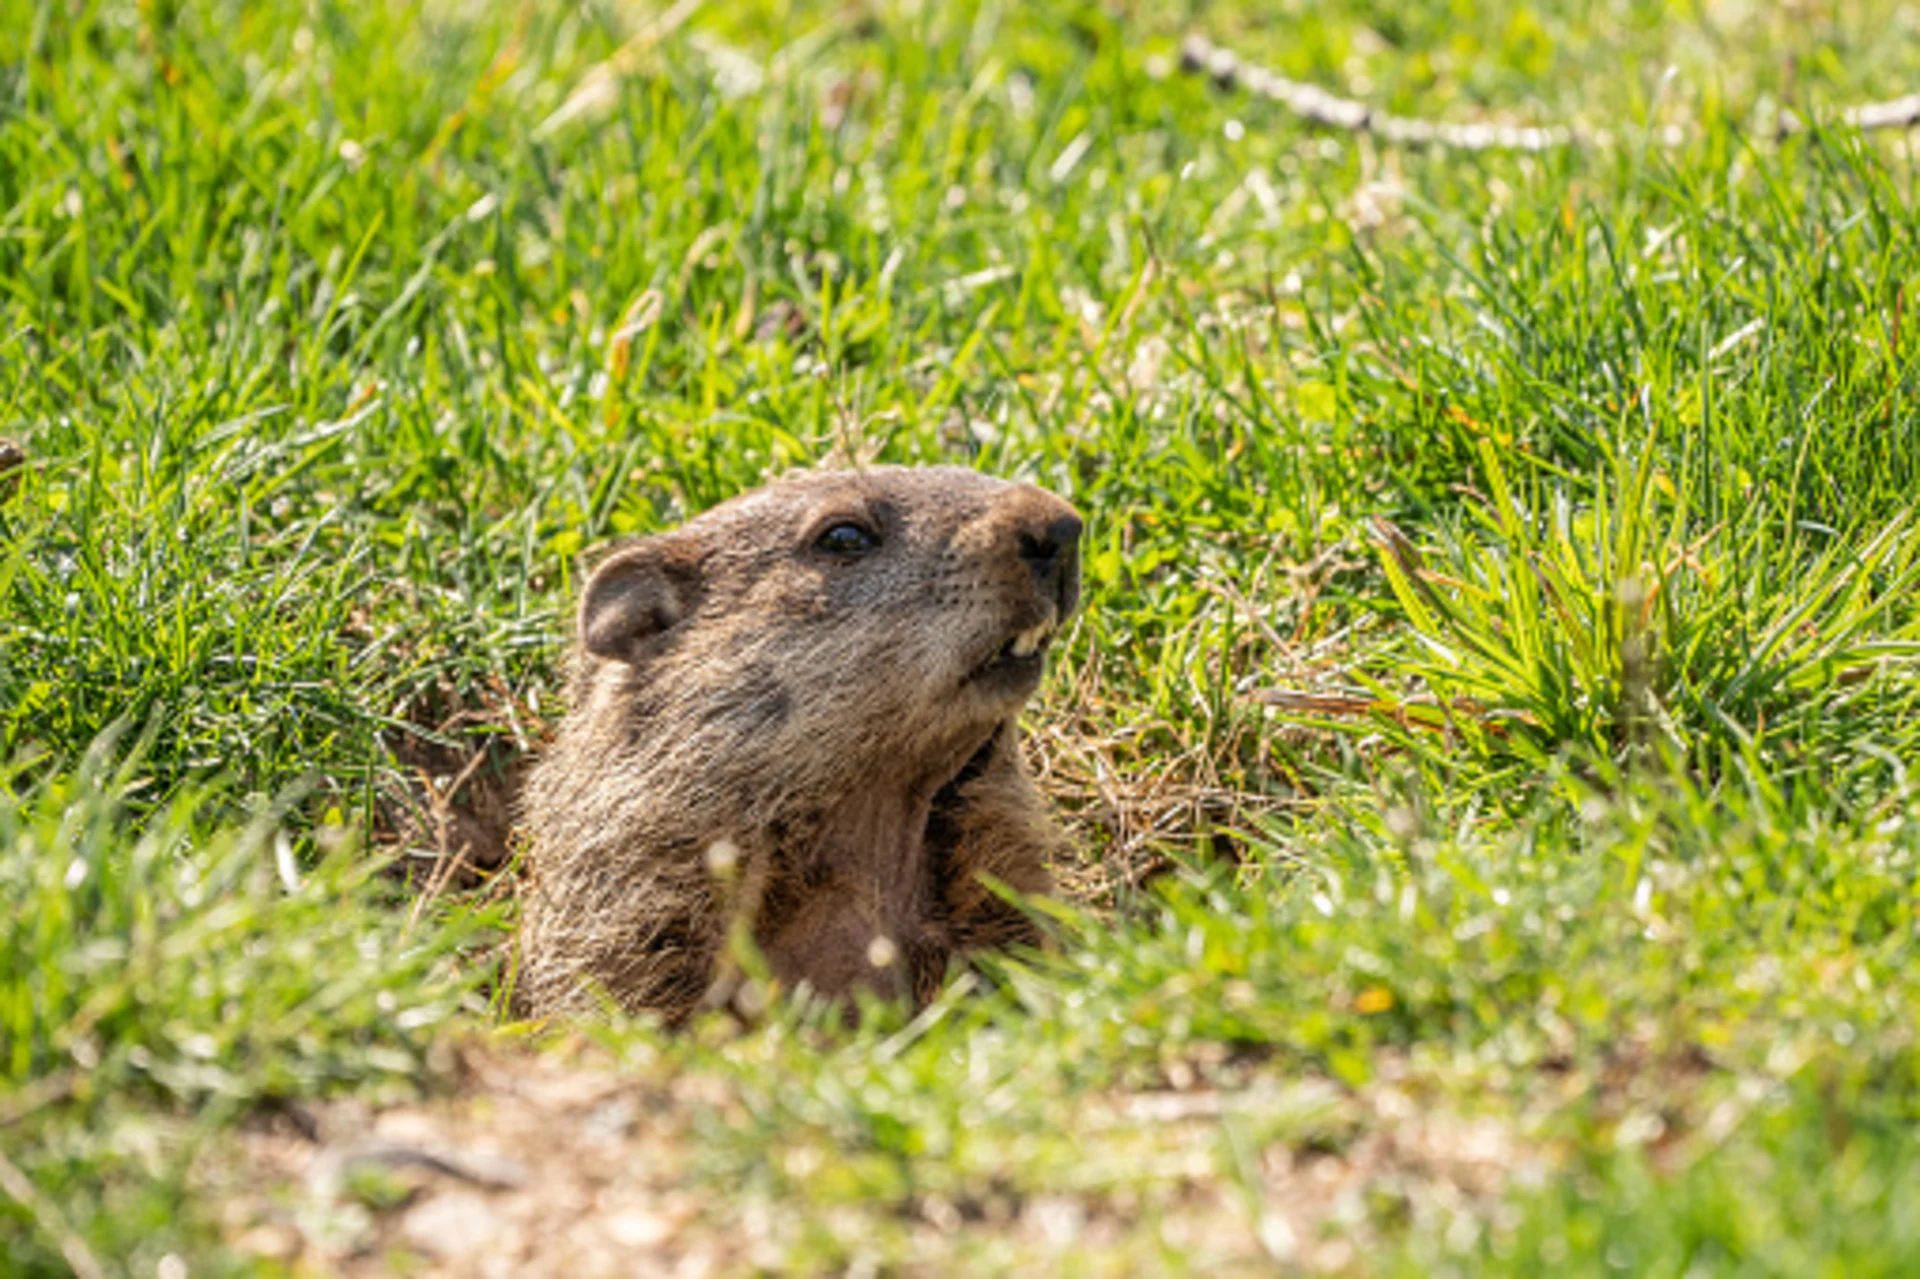 Groundhog Day: the truth about these furry forecasters